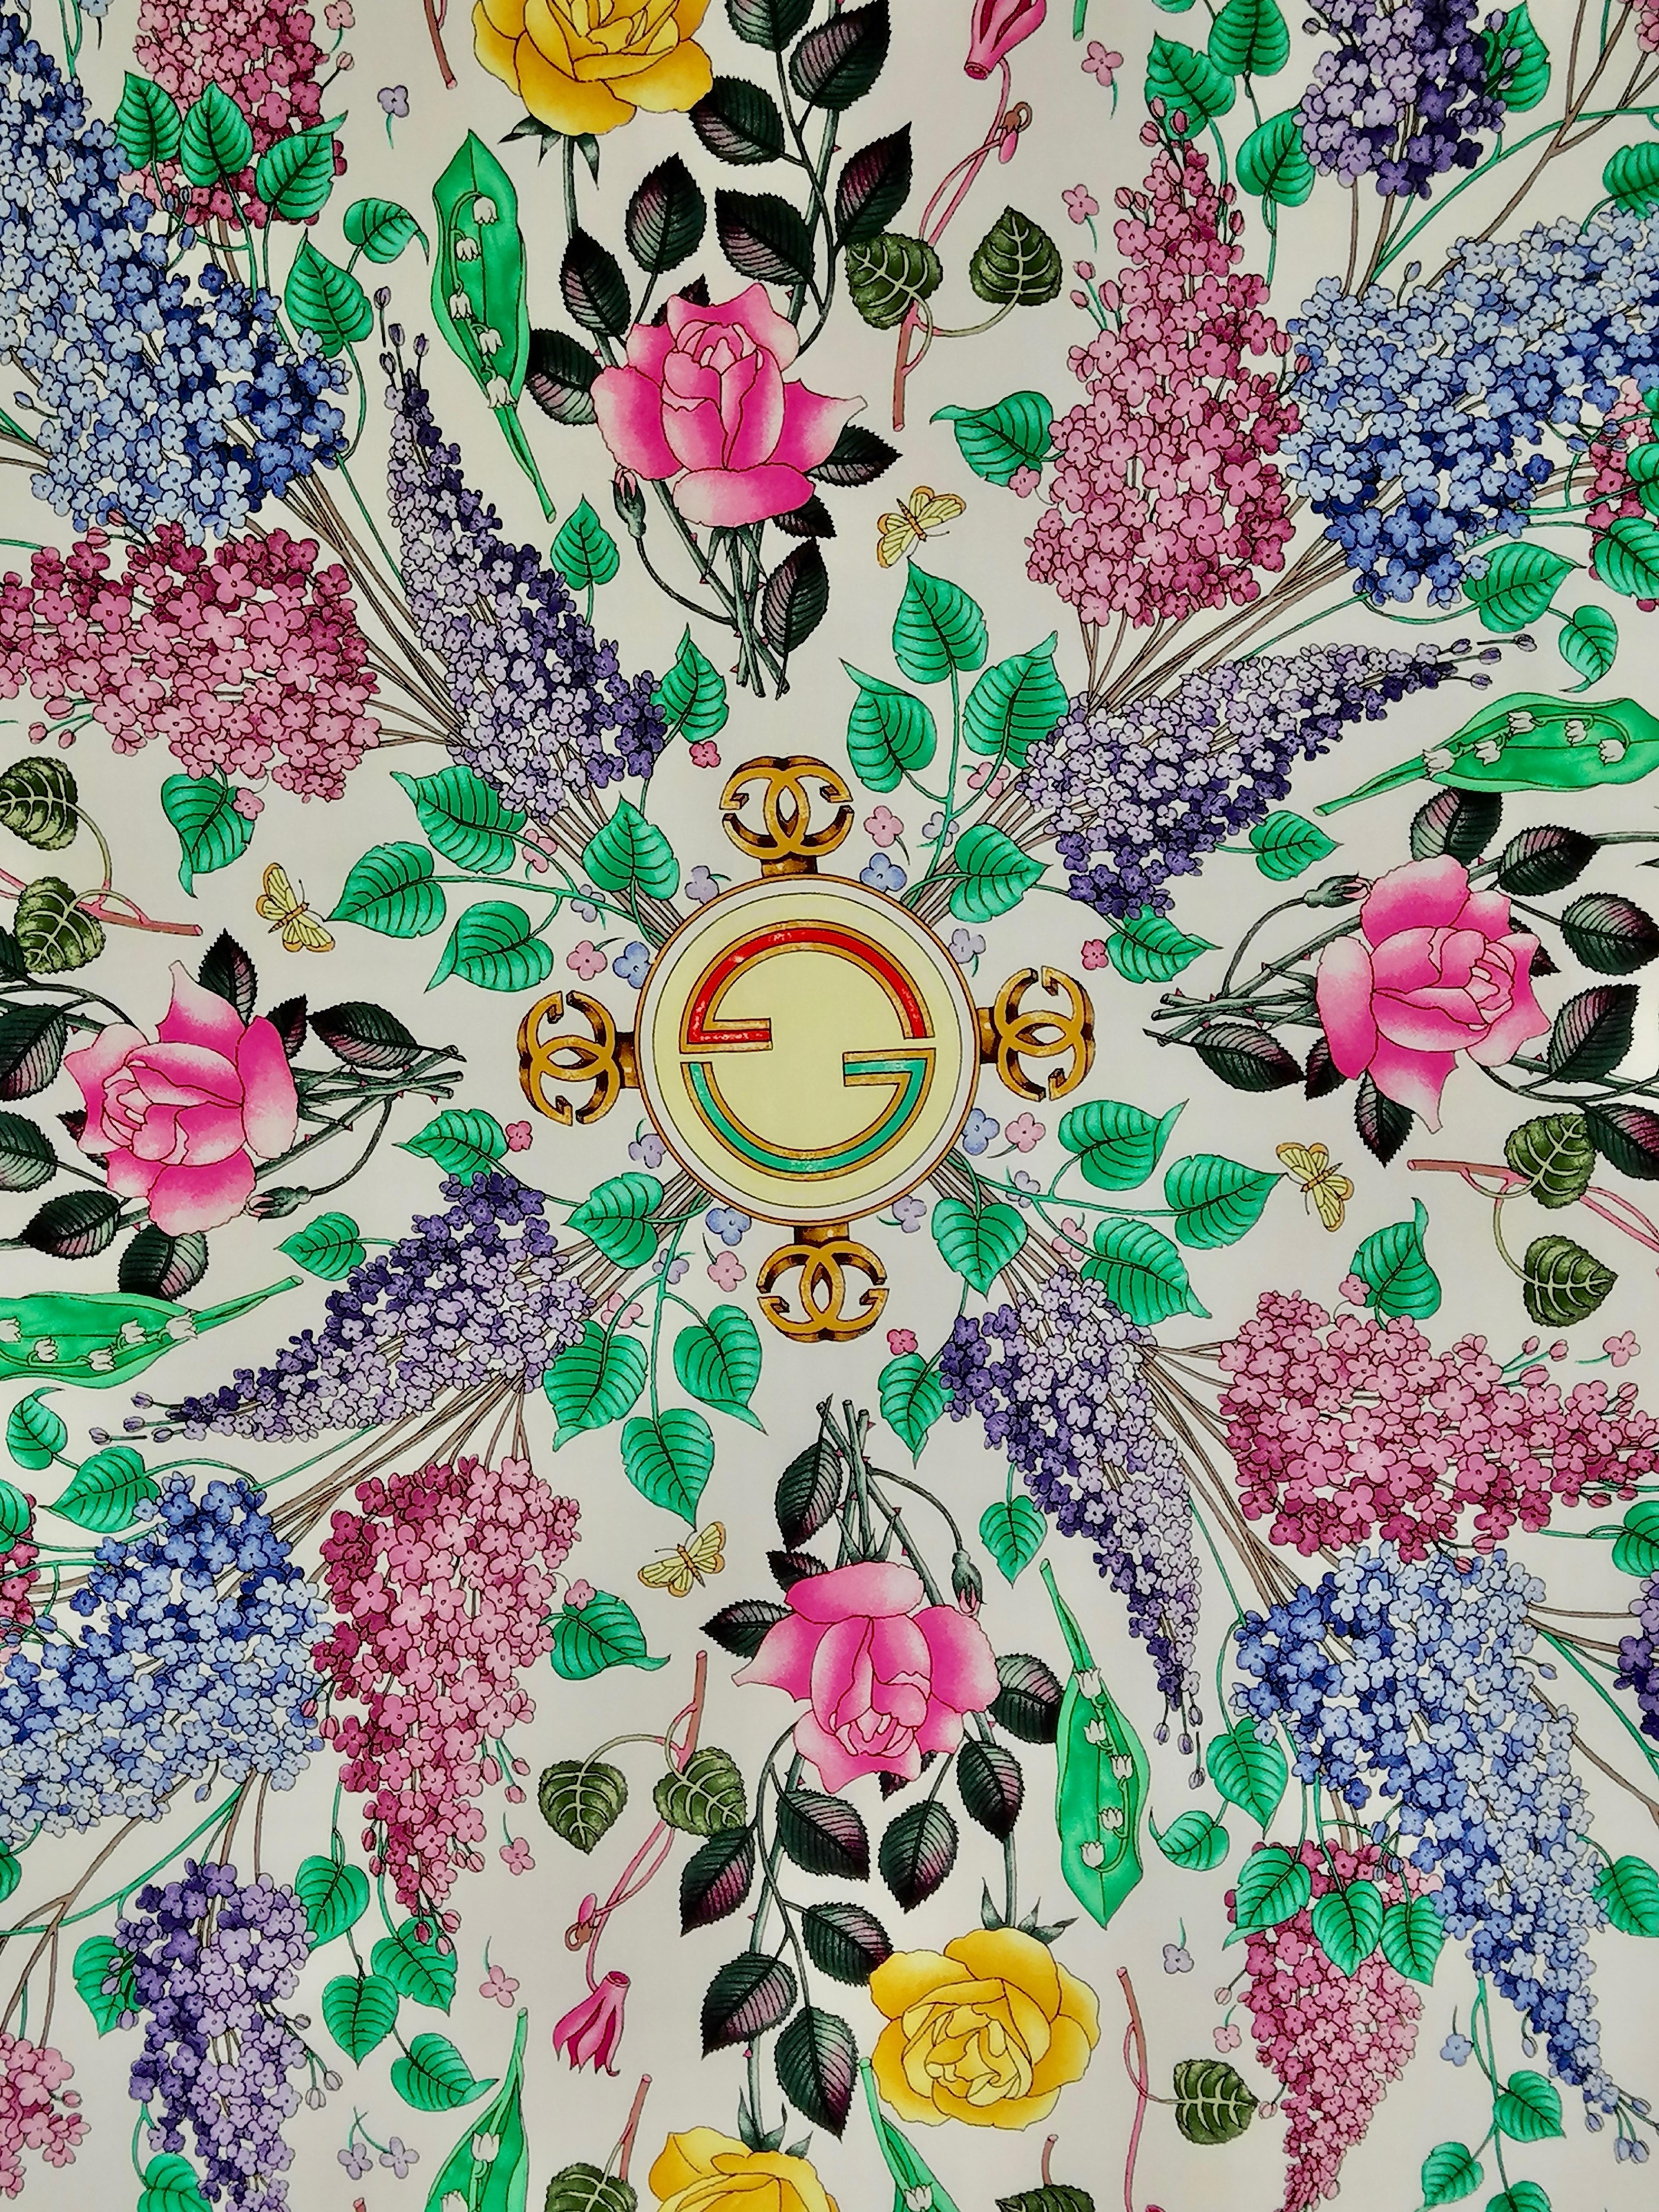 GUCCI silk scarf
Designed by Vittorio Accornero - 70s
Care tag
Hand rolled hem
Cm. 88 x 88 approx.
Very good condition
Floral theme with lilacs, roses, lilies of the valley and cyclamens that stand out against a white background. Burgundy border.